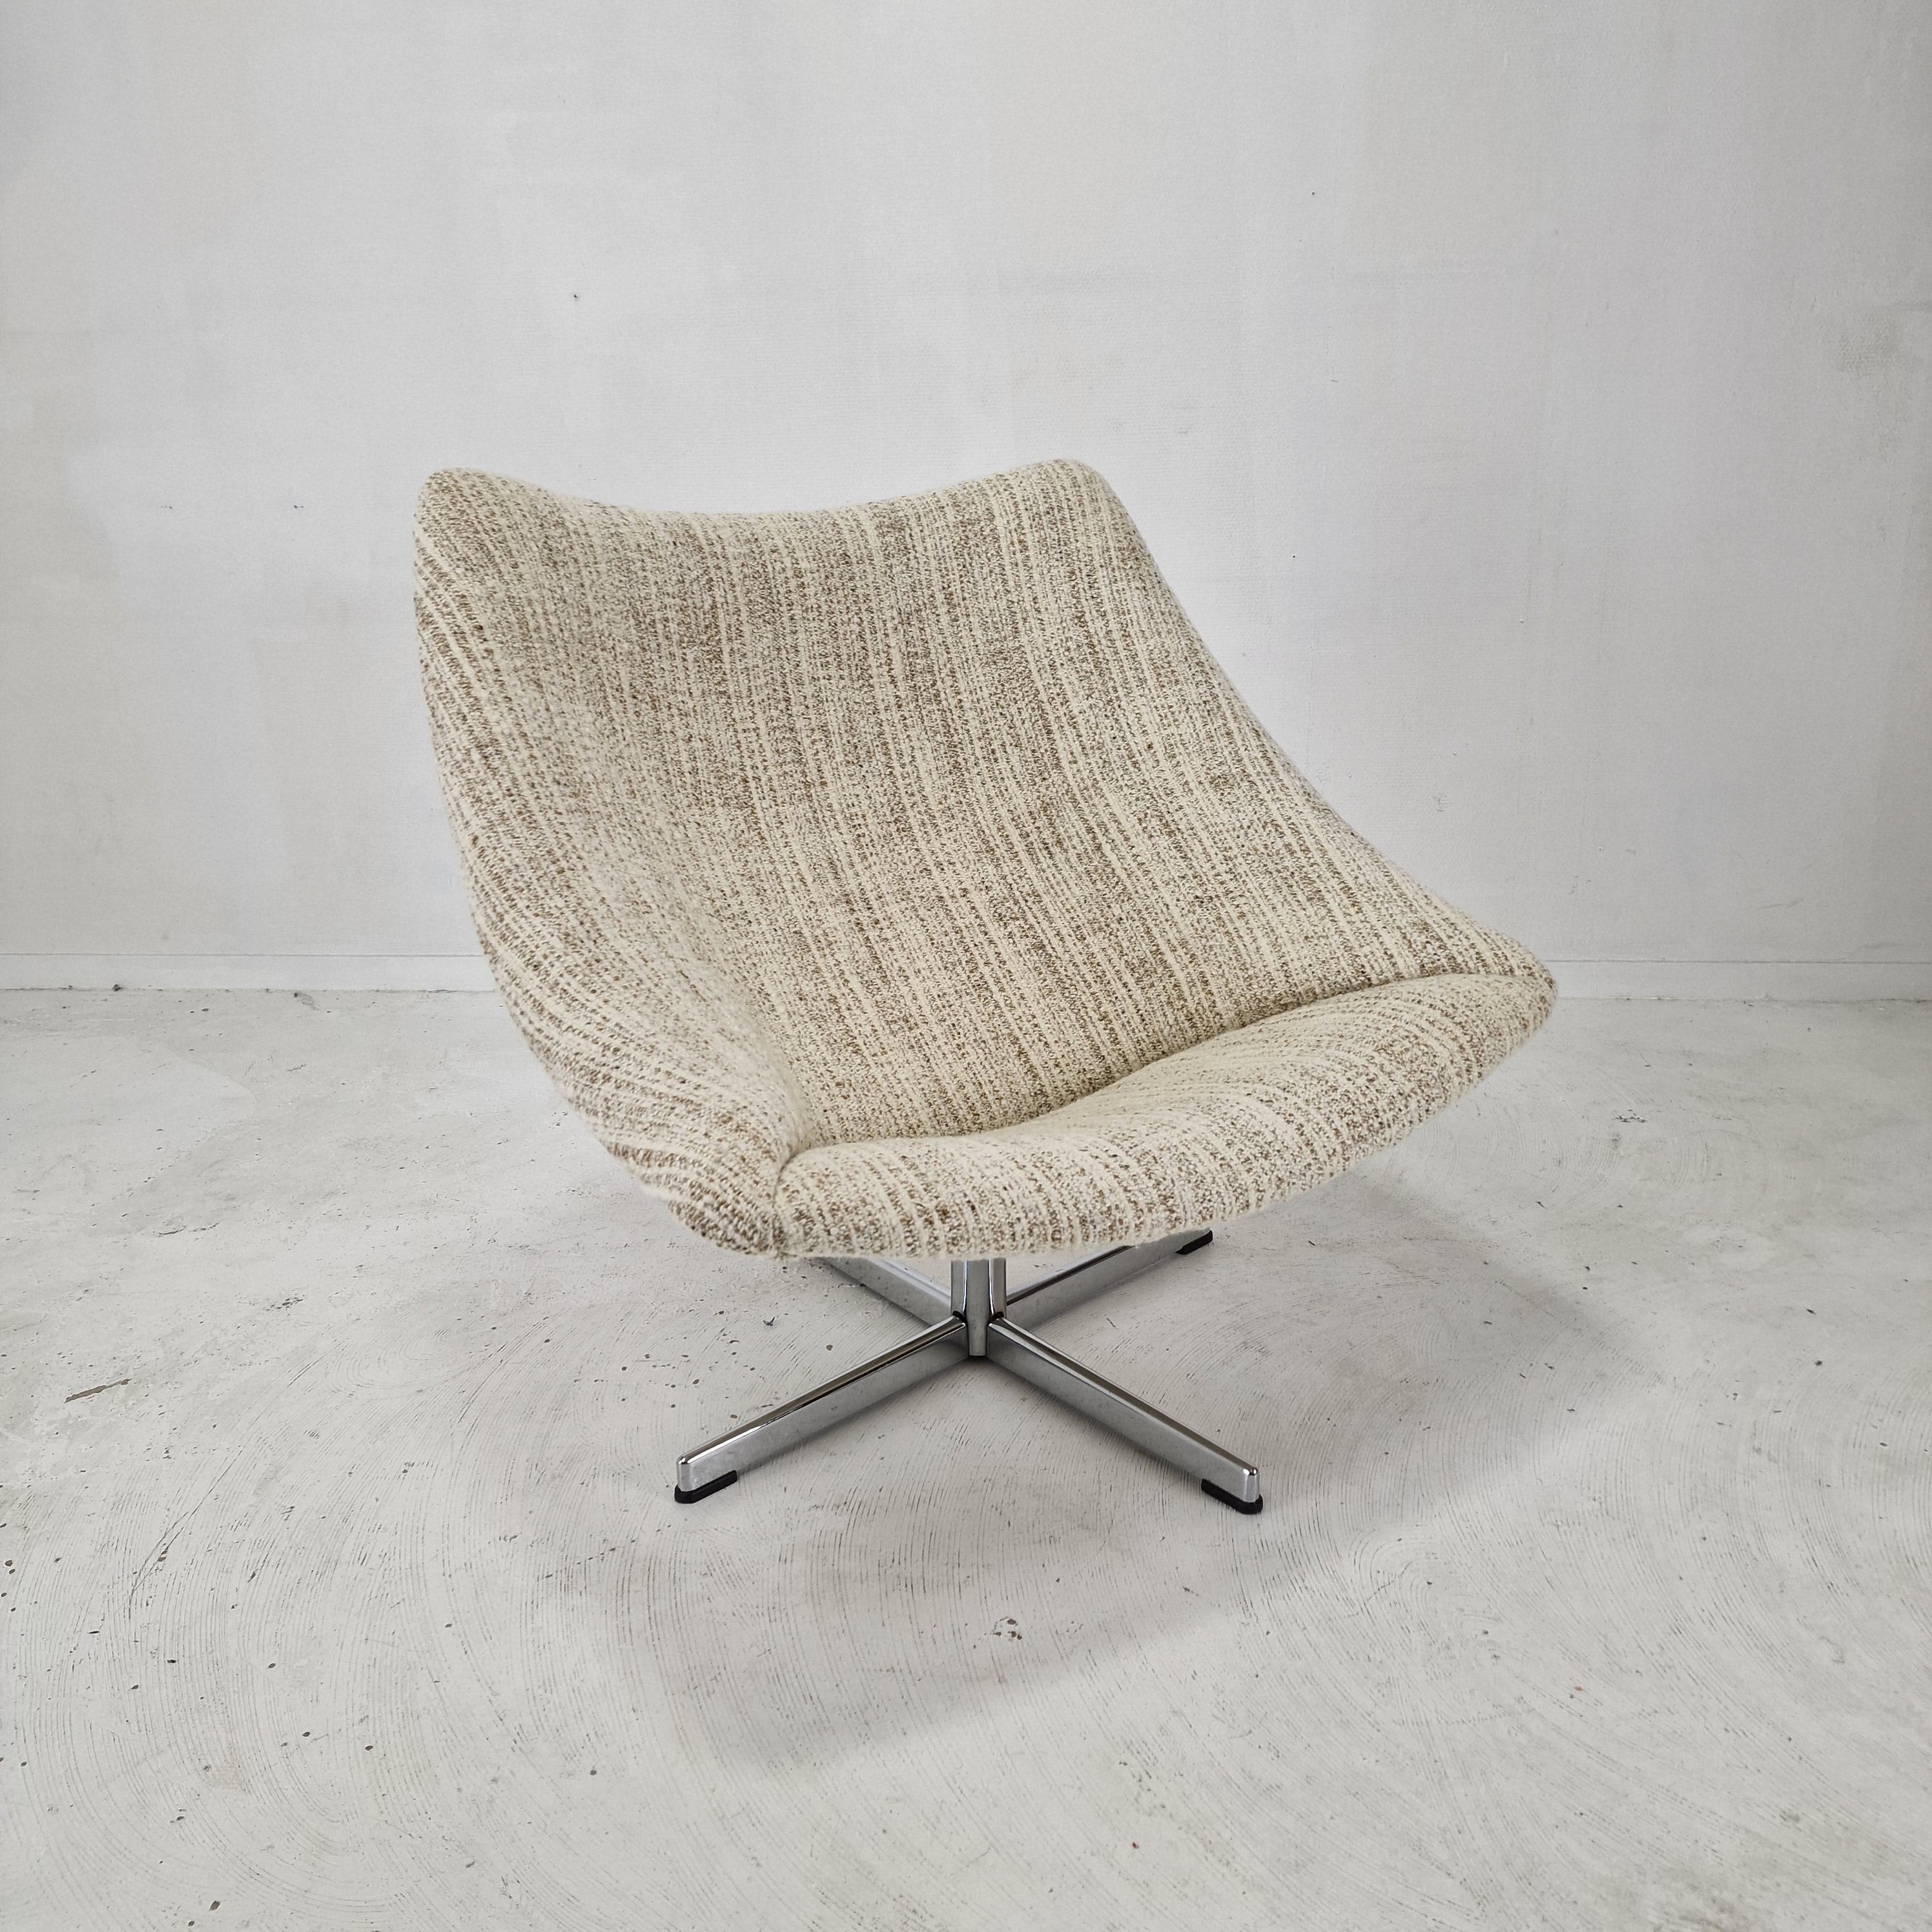 Woven Oyster Chair with Cross Base by Pierre Paulin for Artifort, 1965